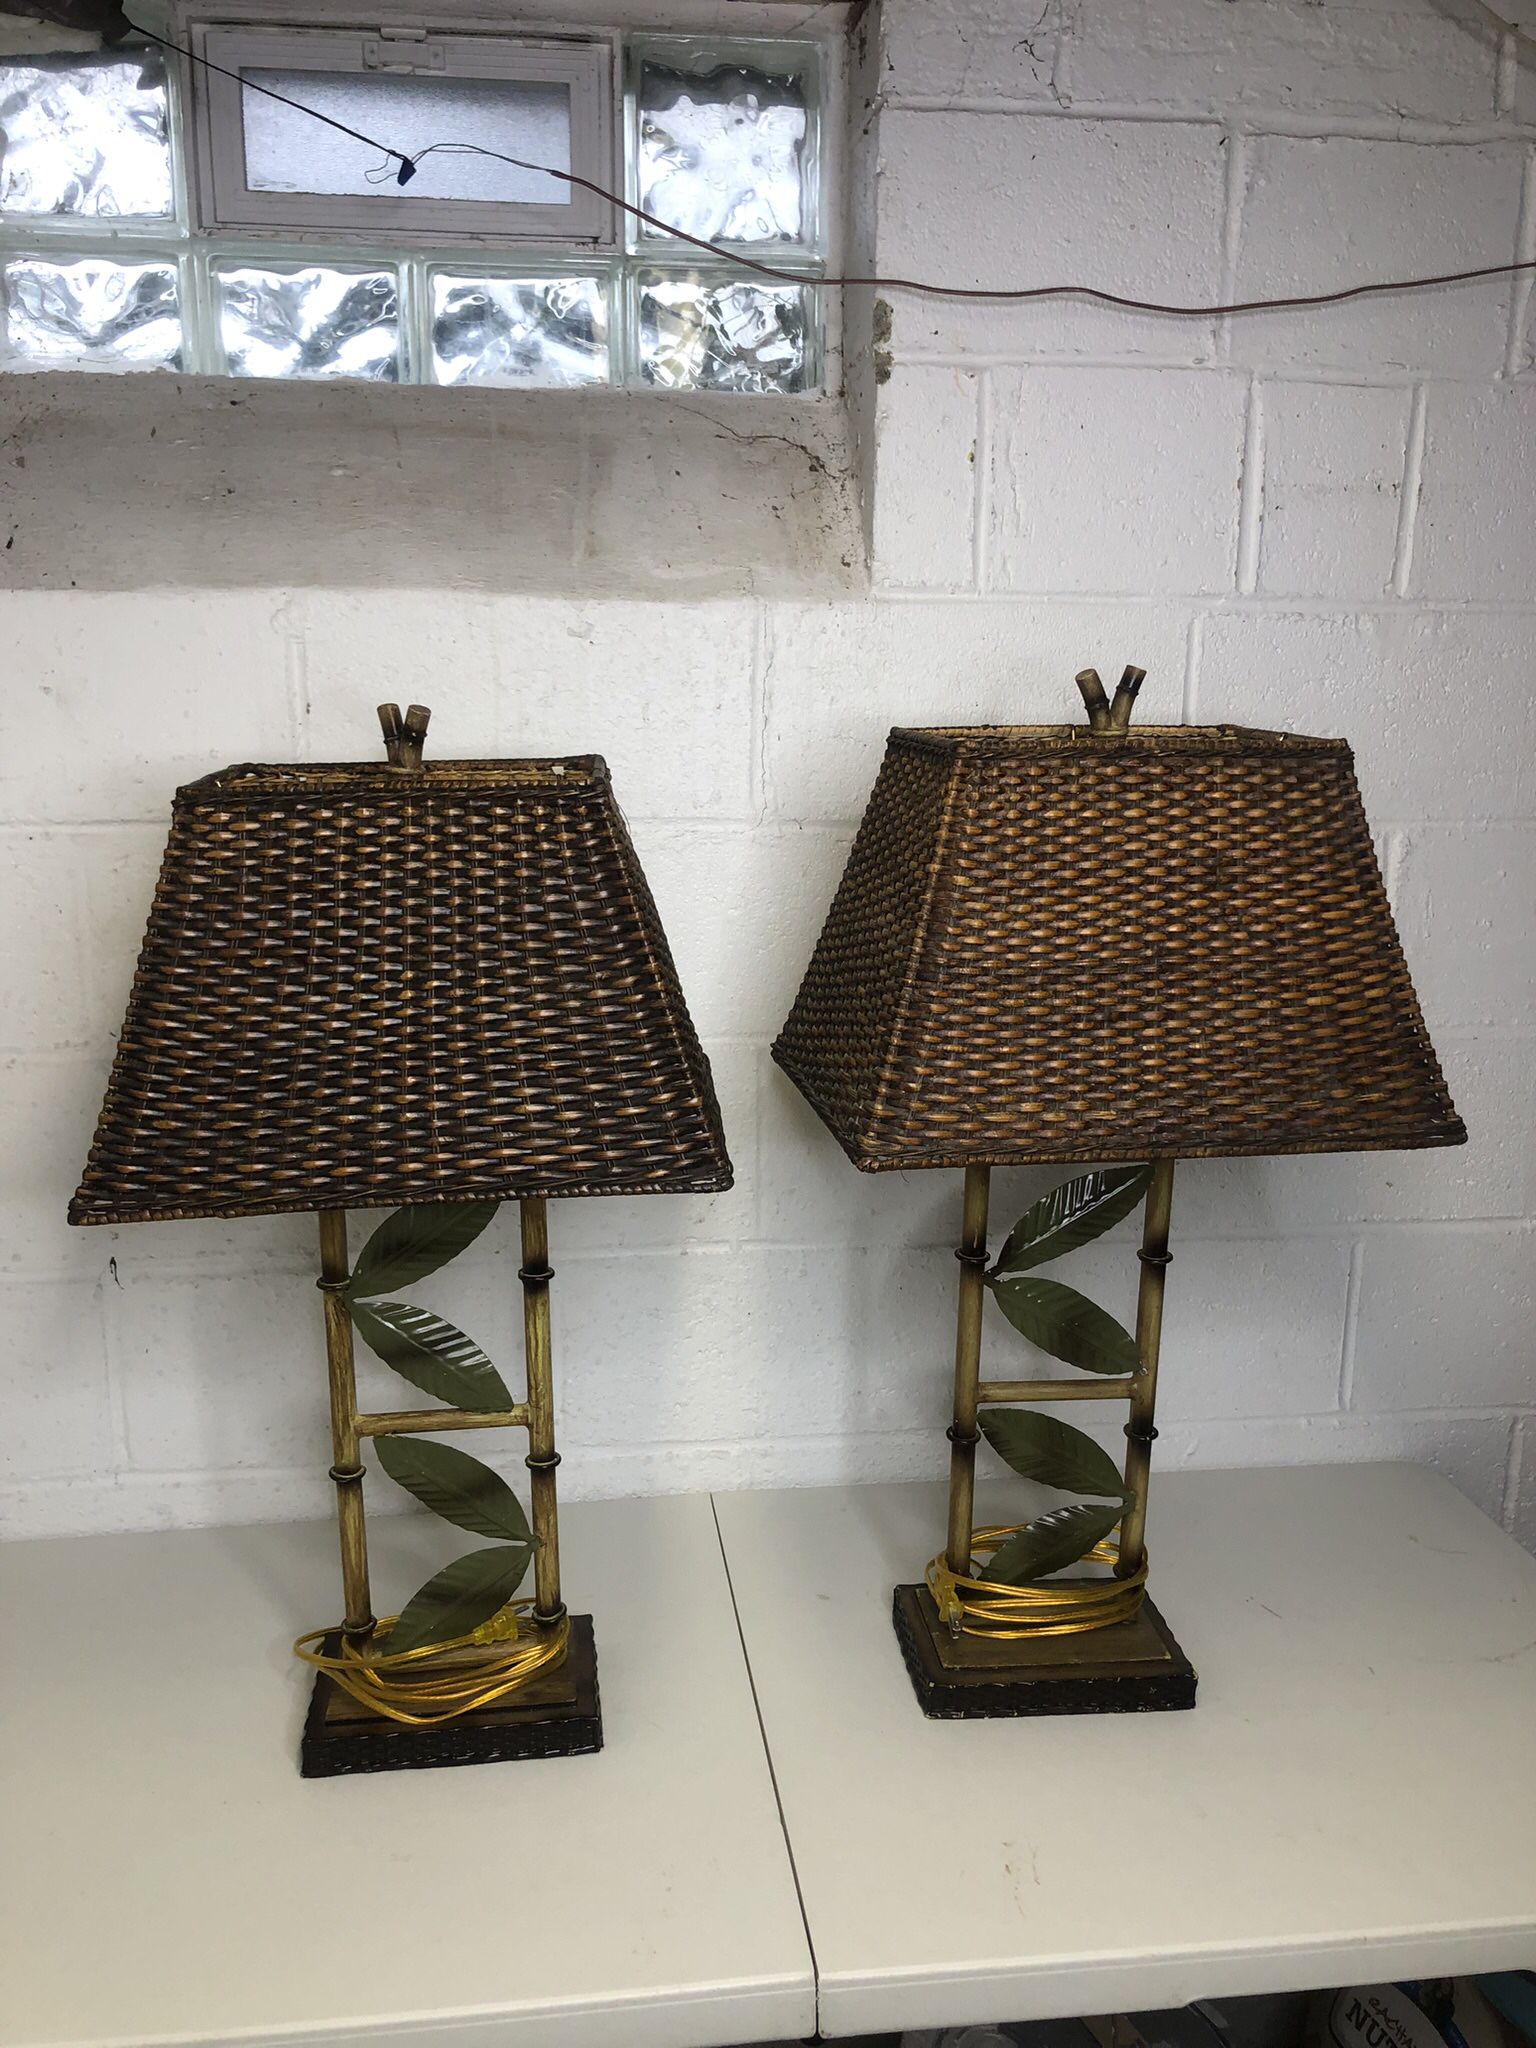 Set Of Tropical Theme Lamps